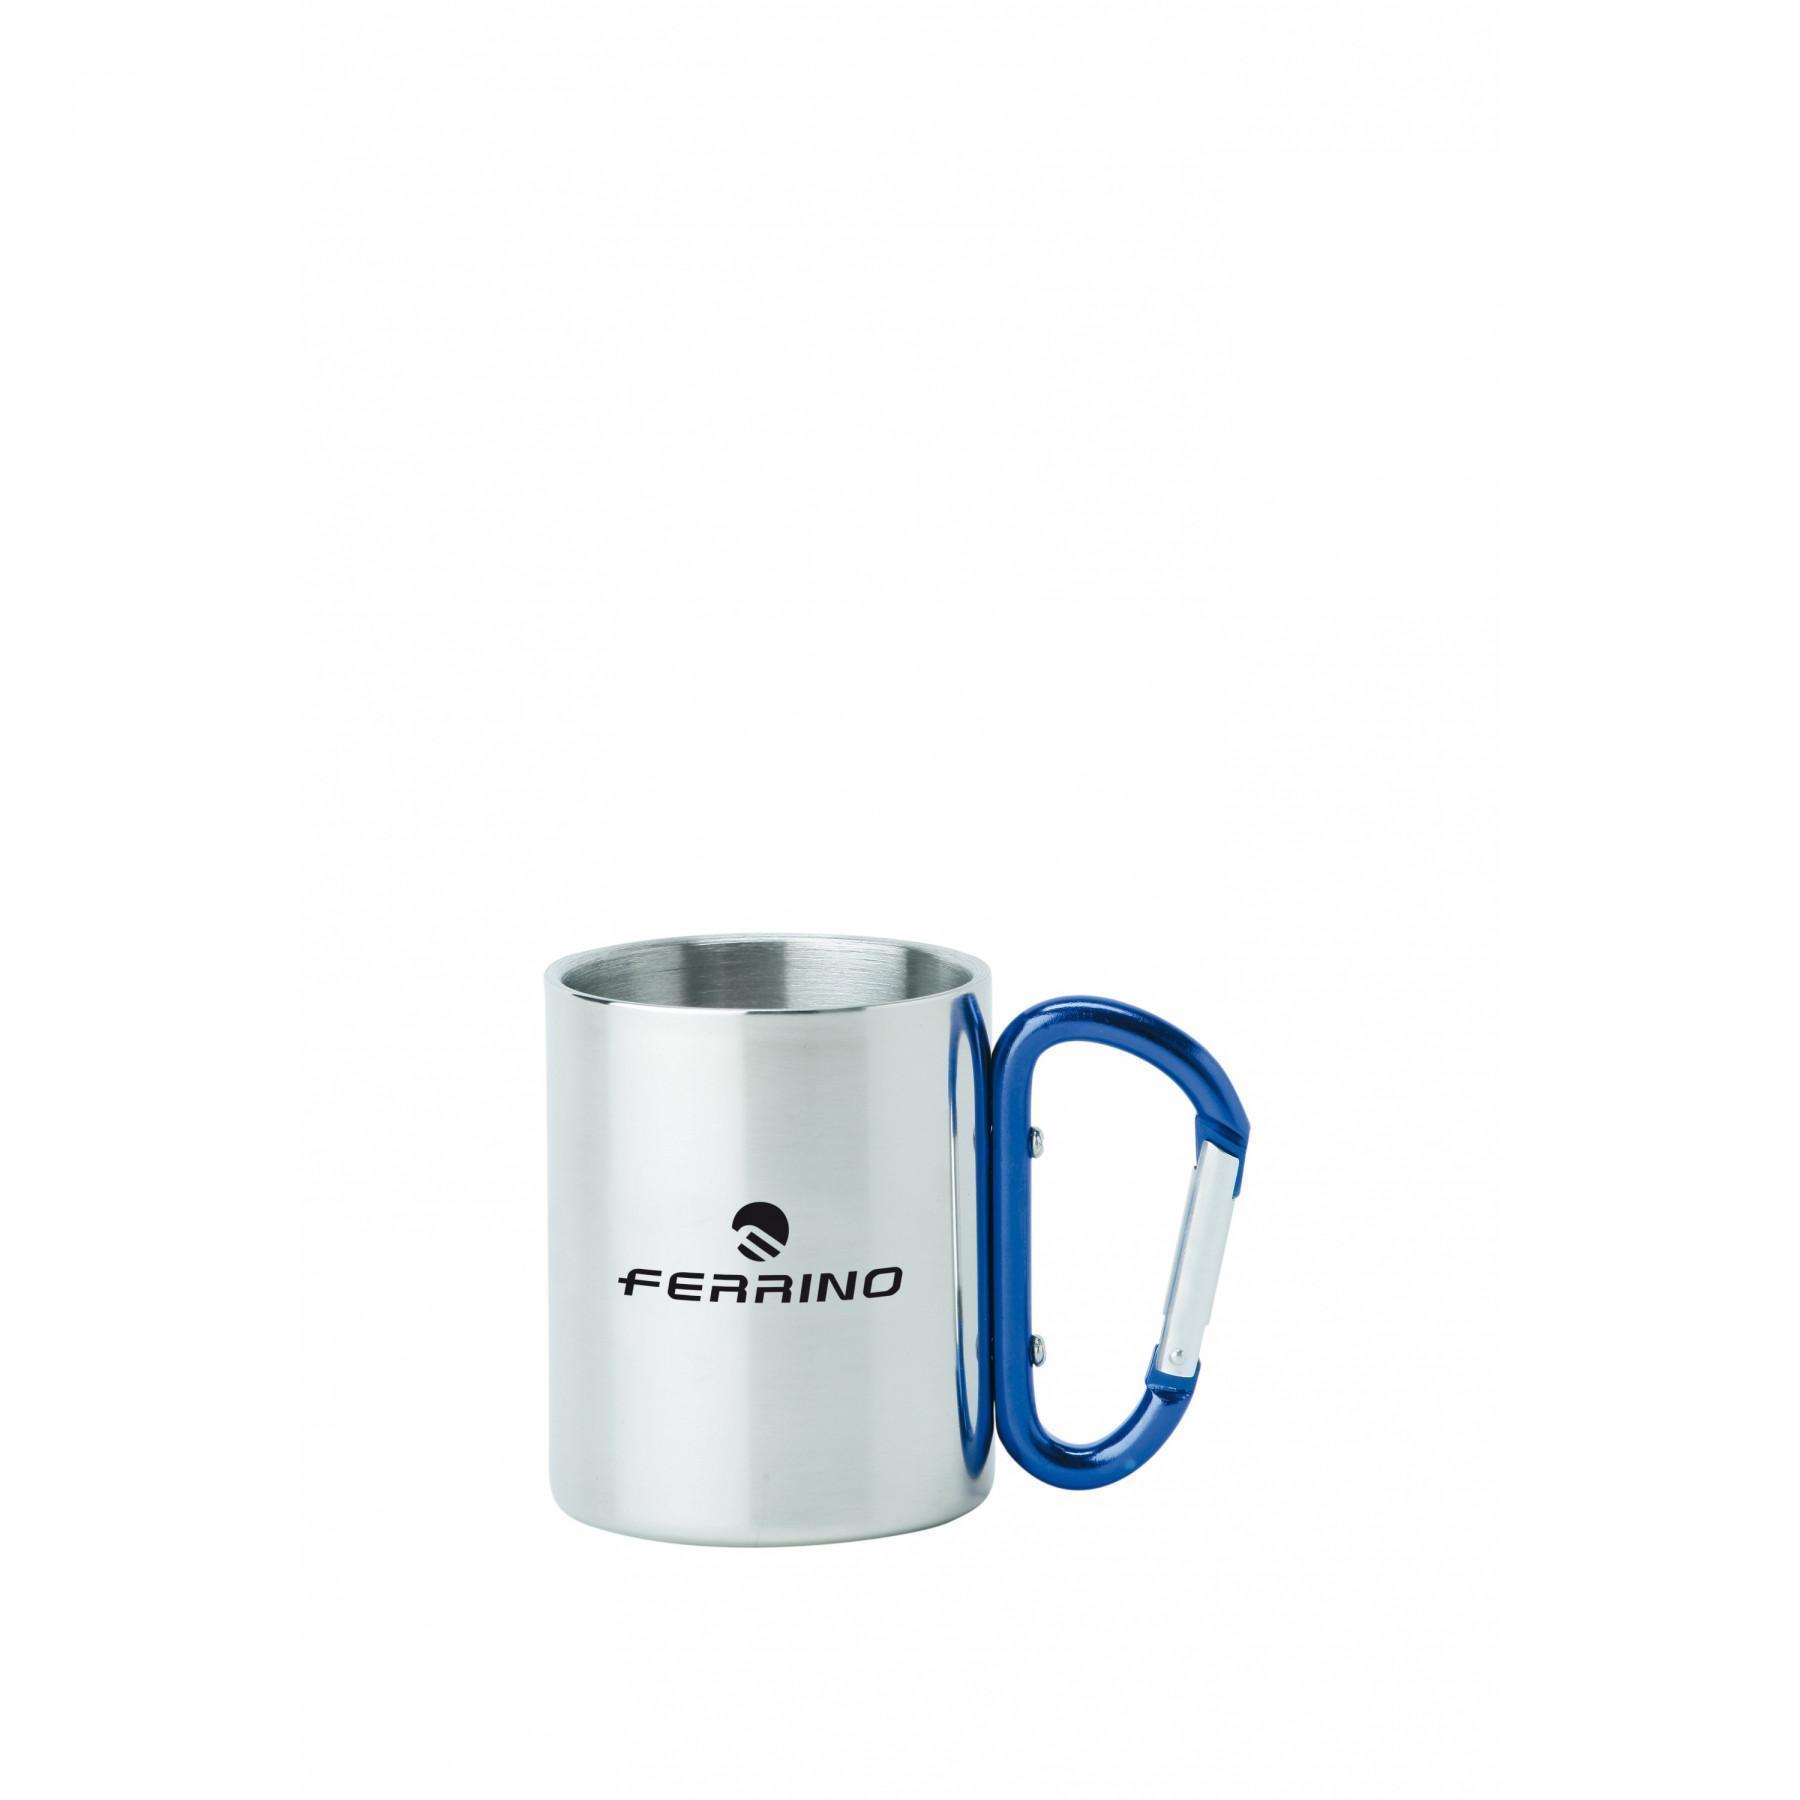 Steel cup with carabiner Ferrino